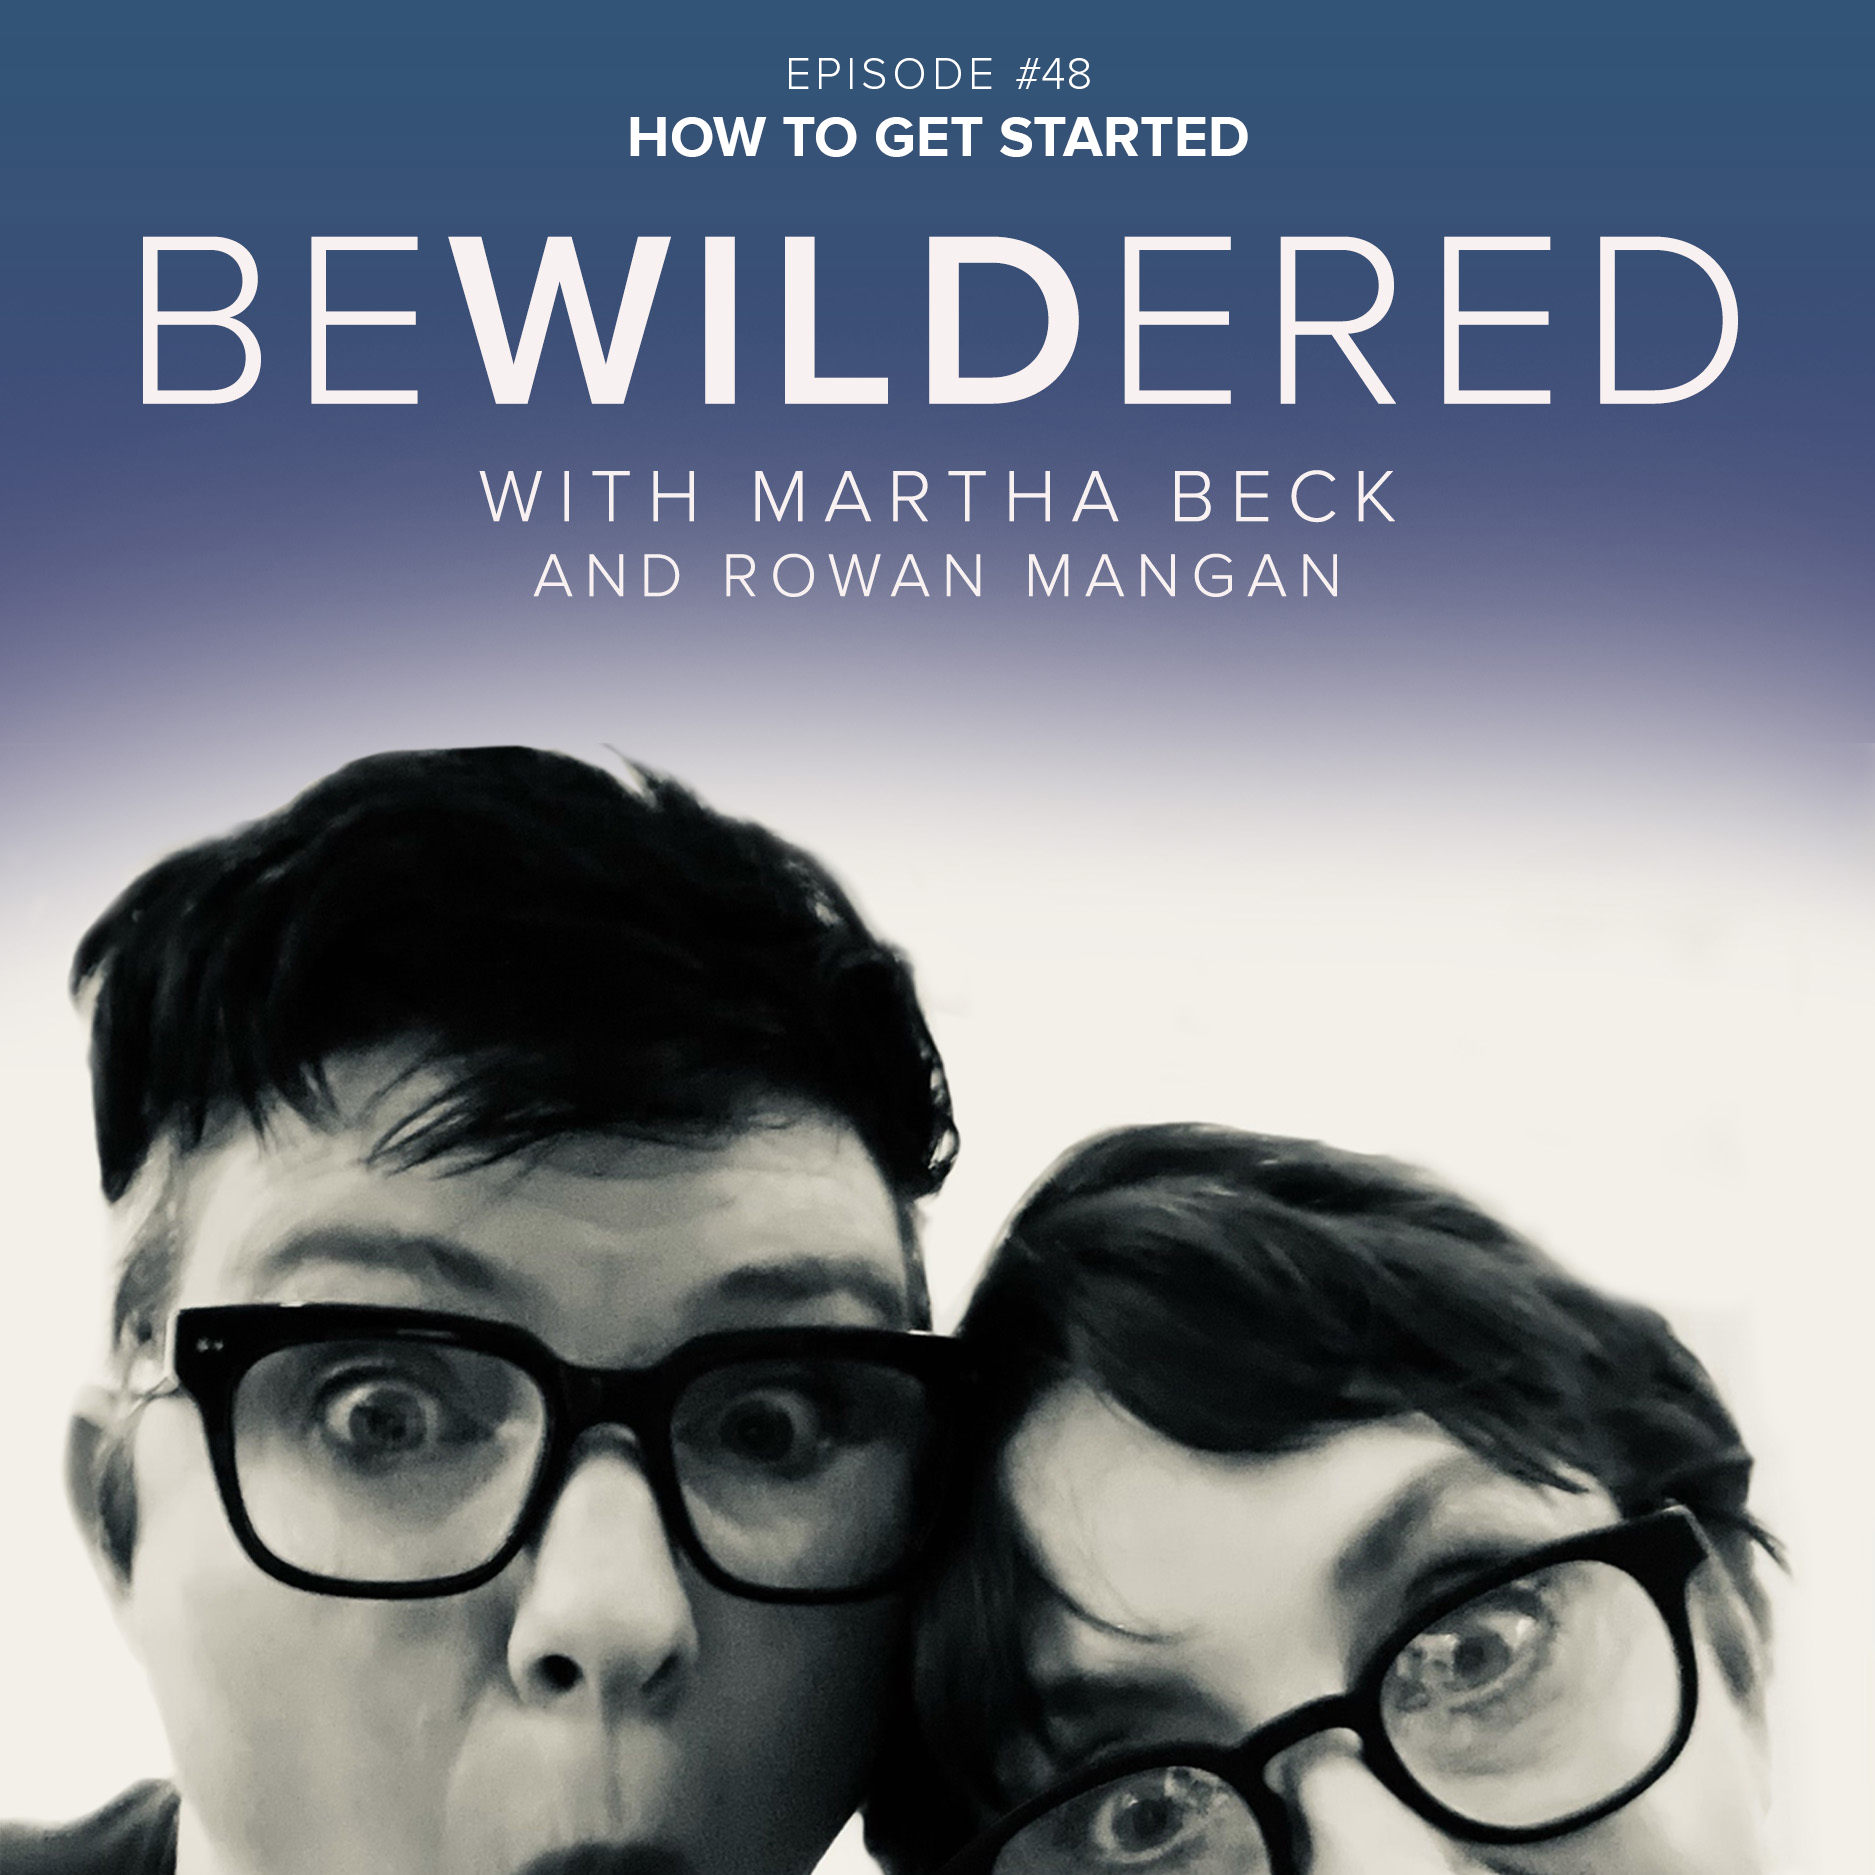 Image for Episode #48 How to Get Started for the Bewildered Podcast with Martha Beck and Rowan Mangan